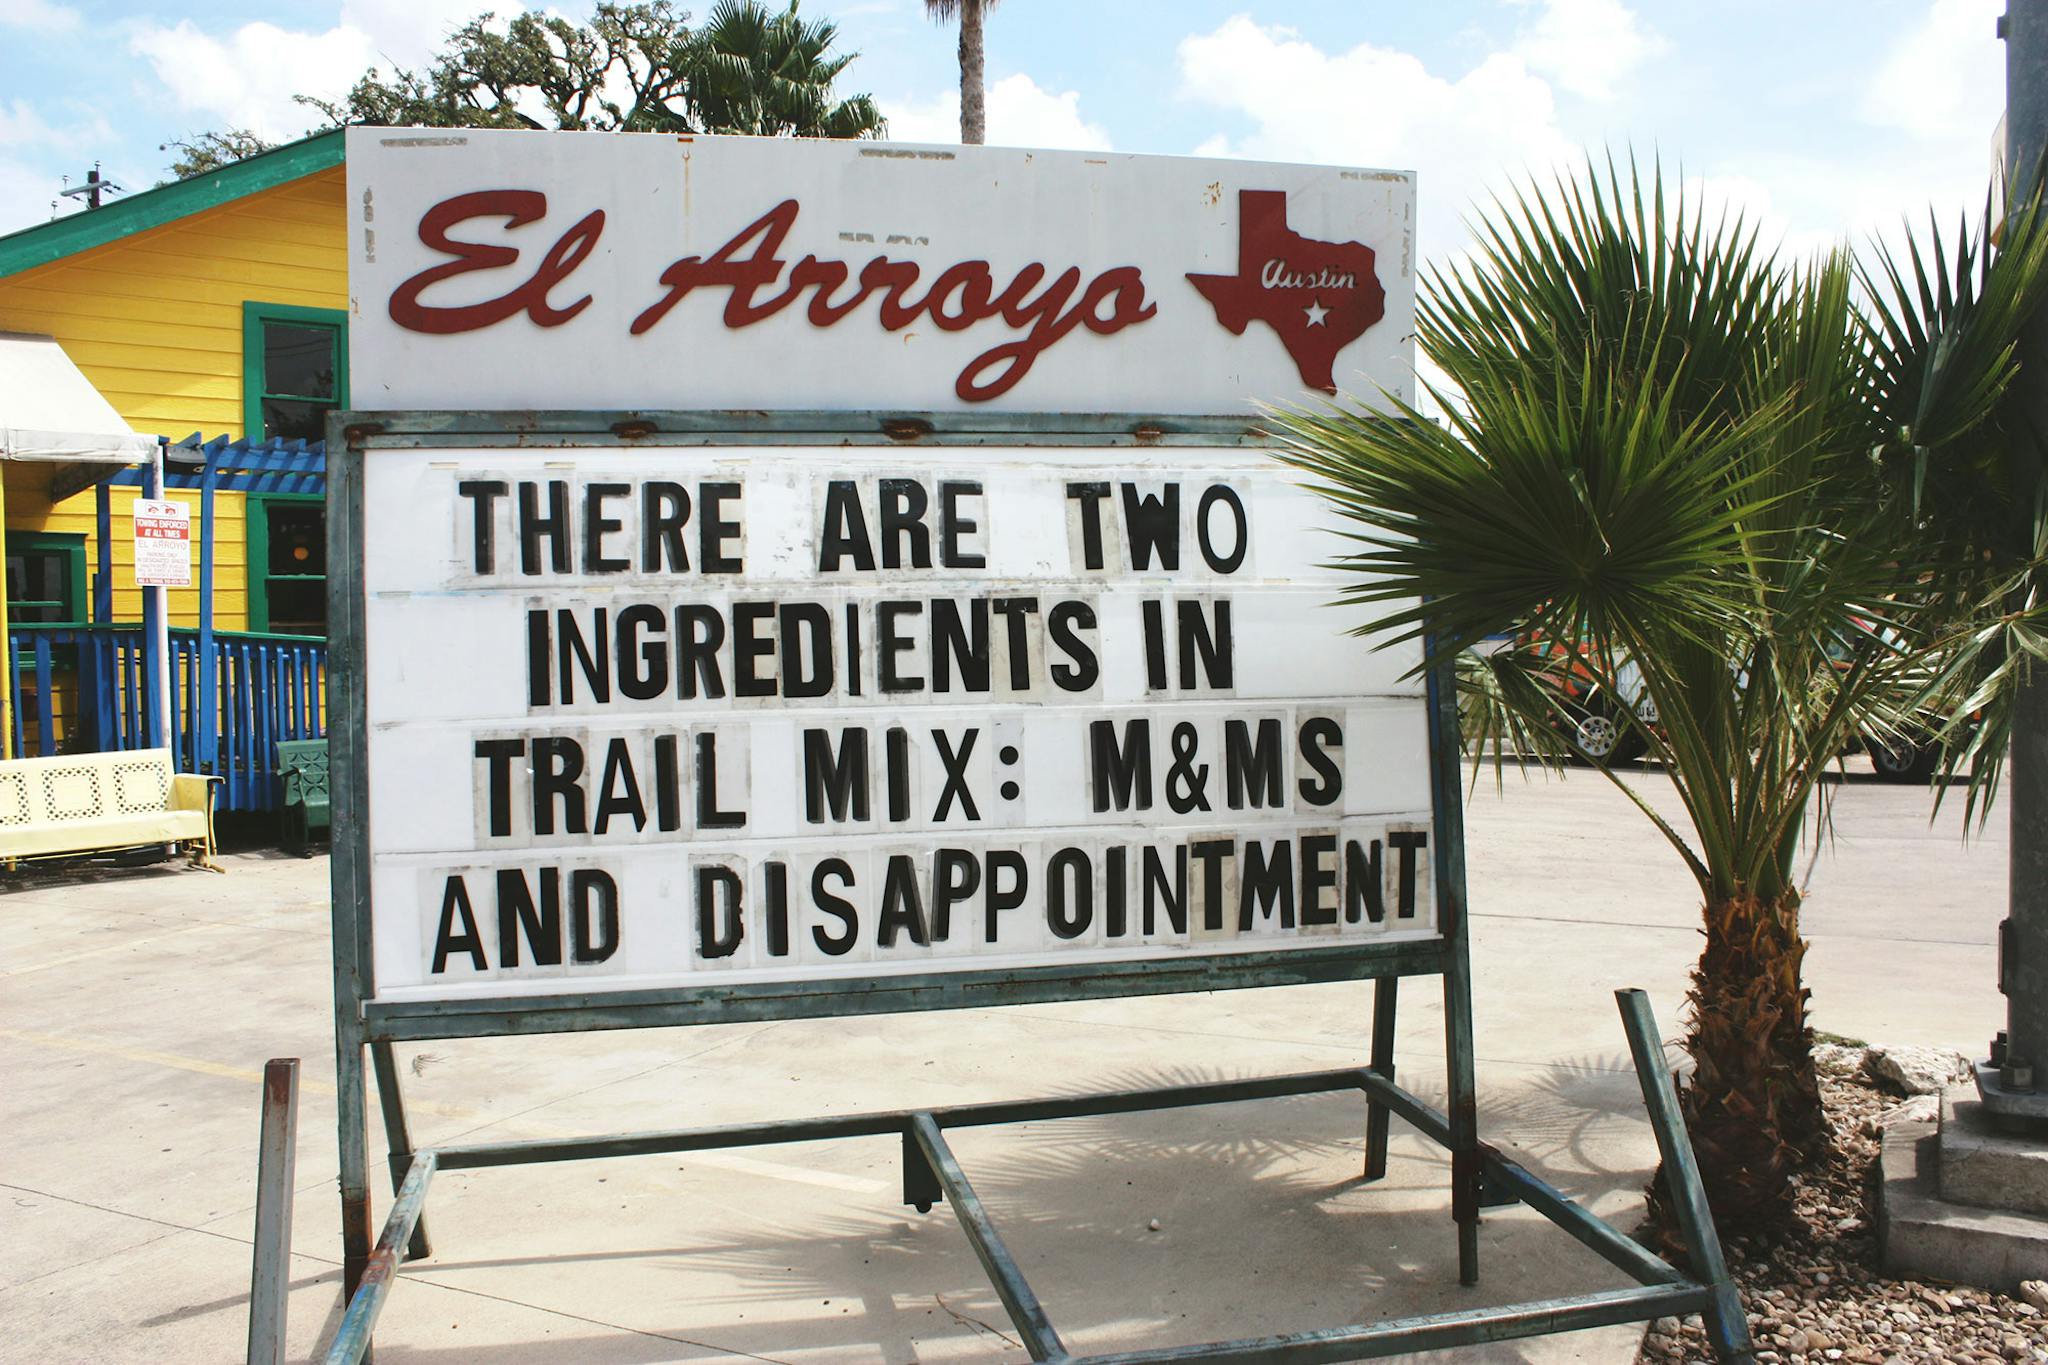 El Arroyo sign says there are two ingredients in trail mix: m&ms and disappointment.